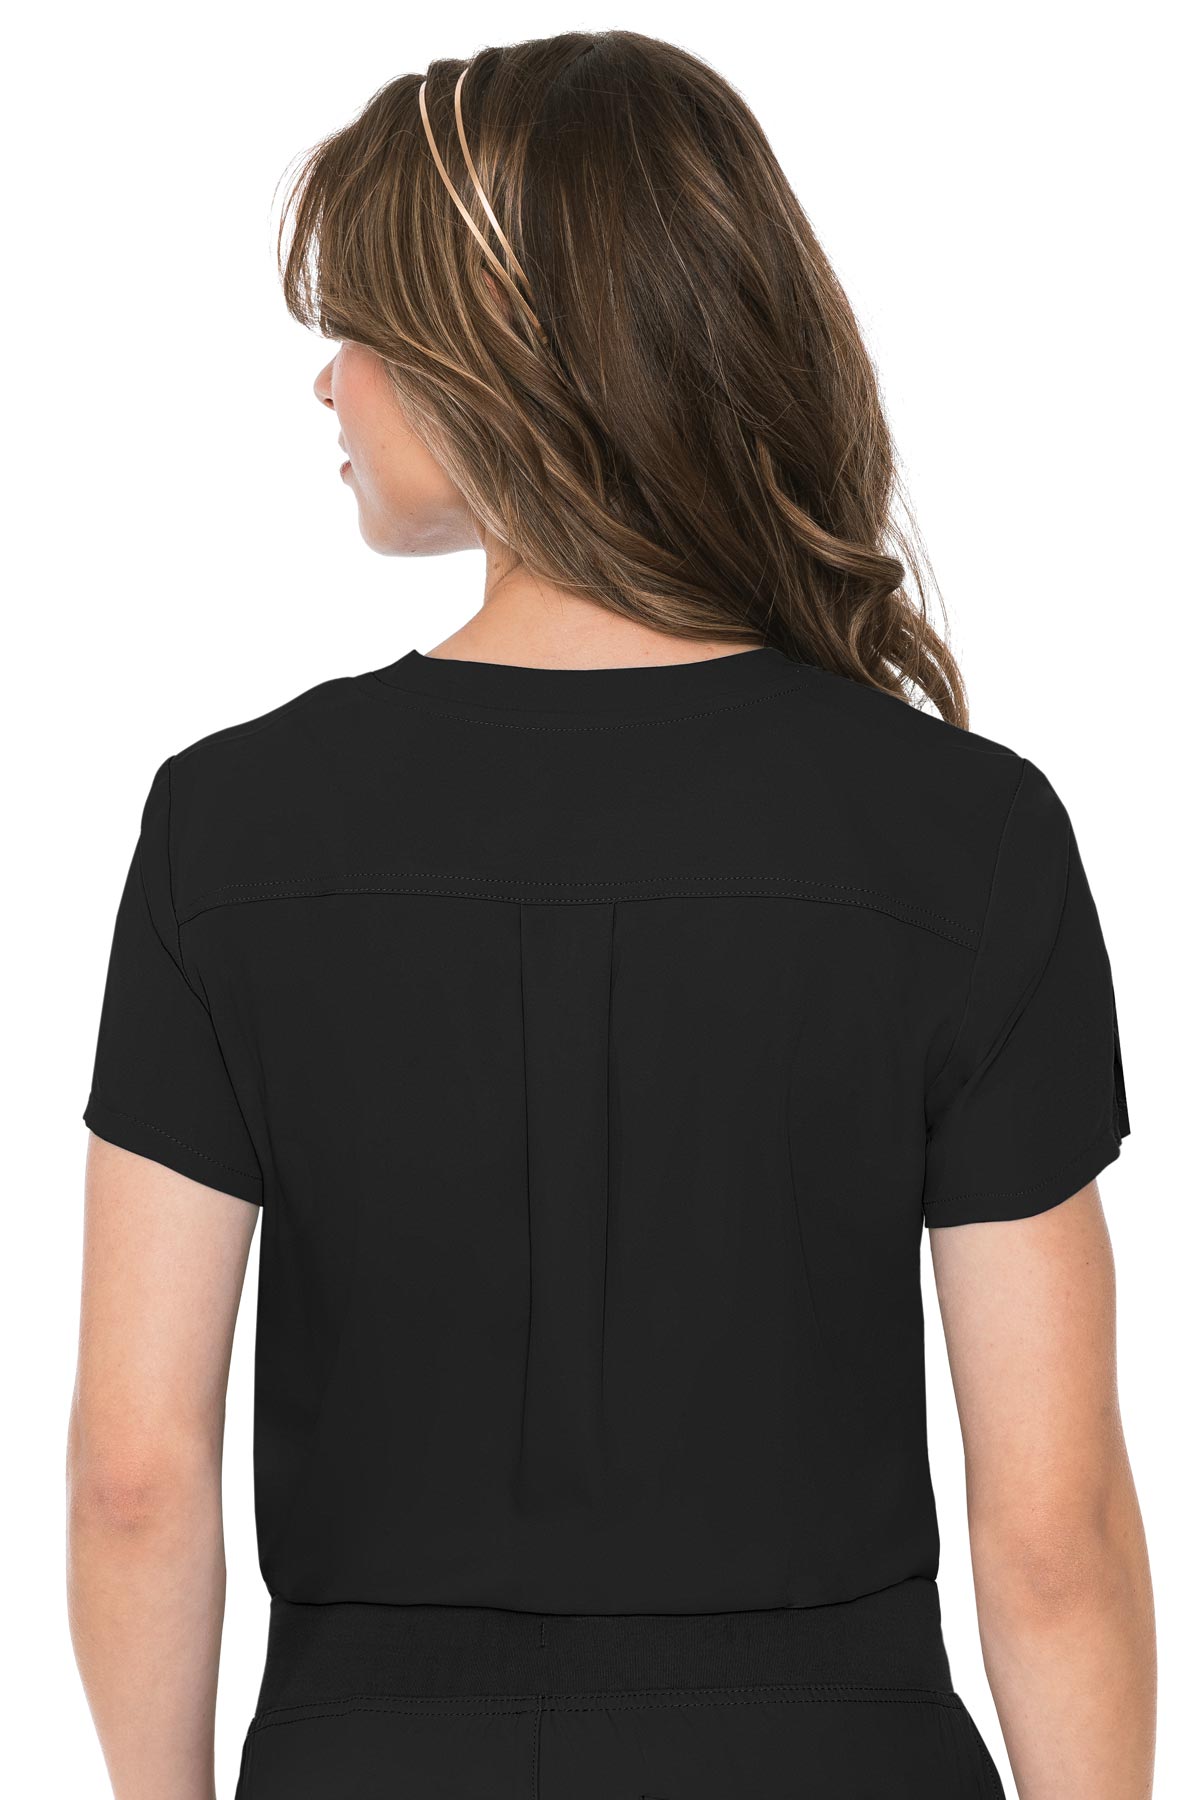 Med Couture 2432 Insight 1 Pocket Tuck-In Top Black Back